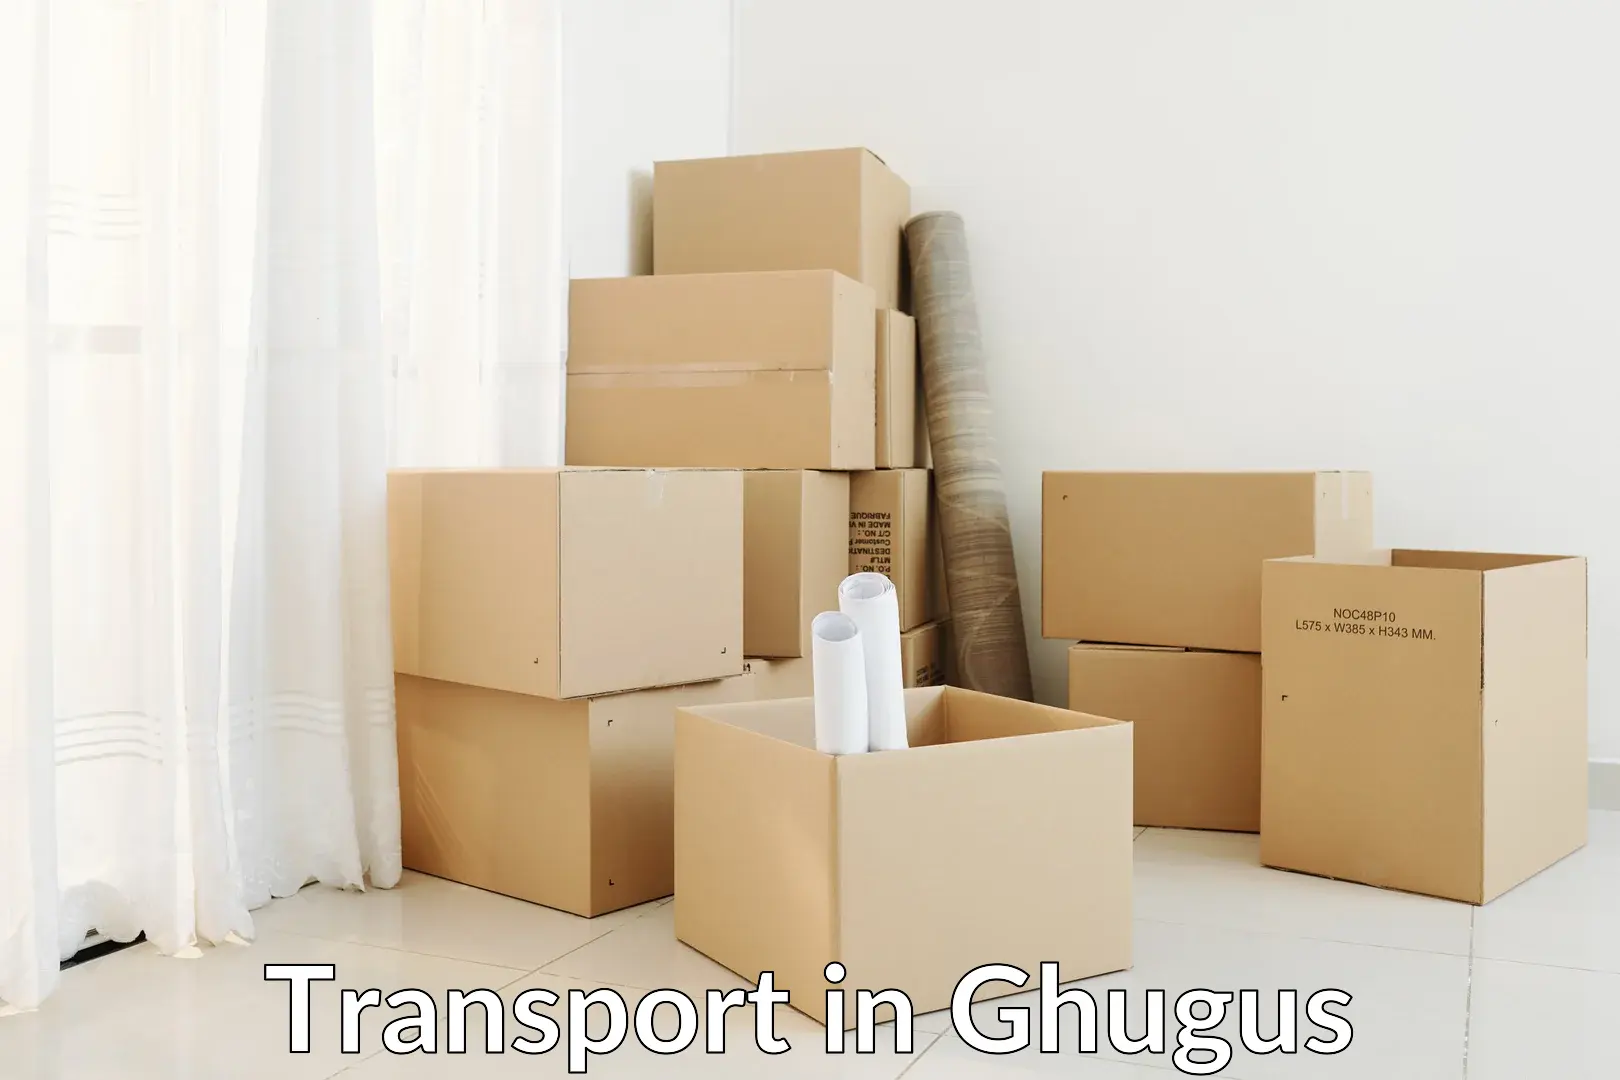 Commercial transport service in Ghugus